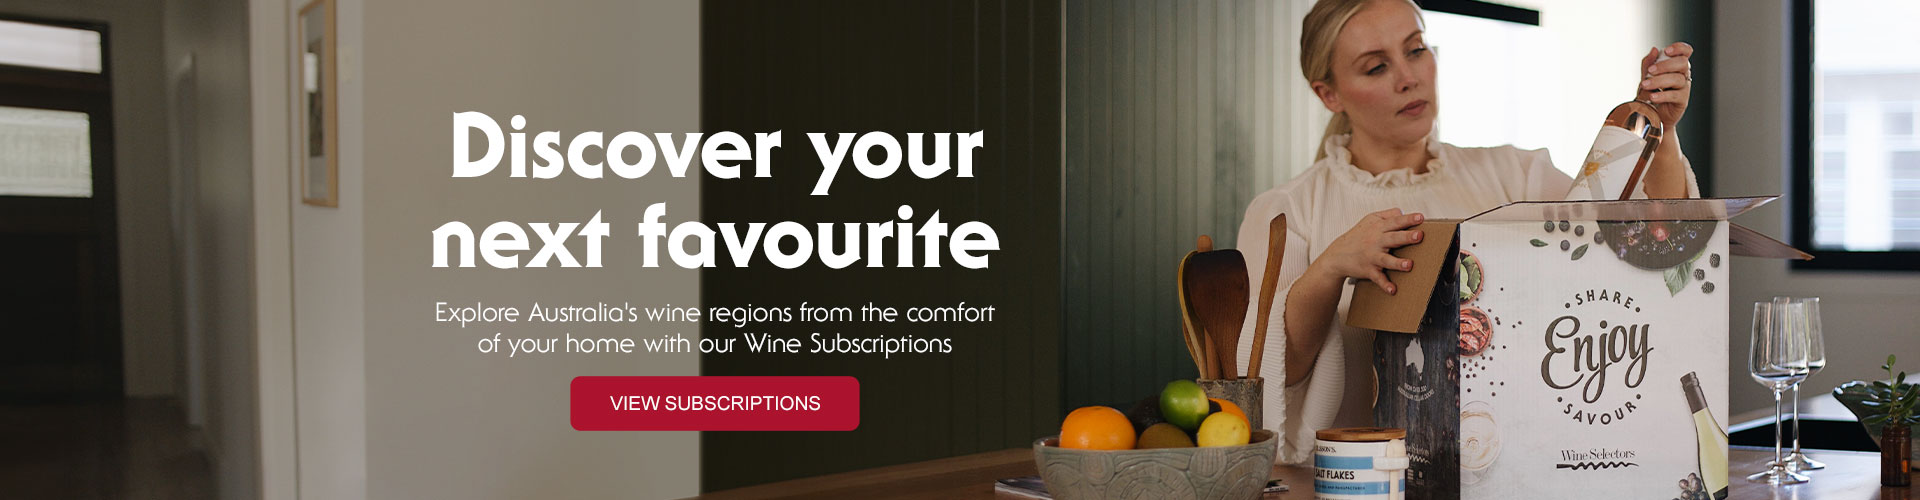 Discover your next favourite wine with Wine Selectors subscriptions!